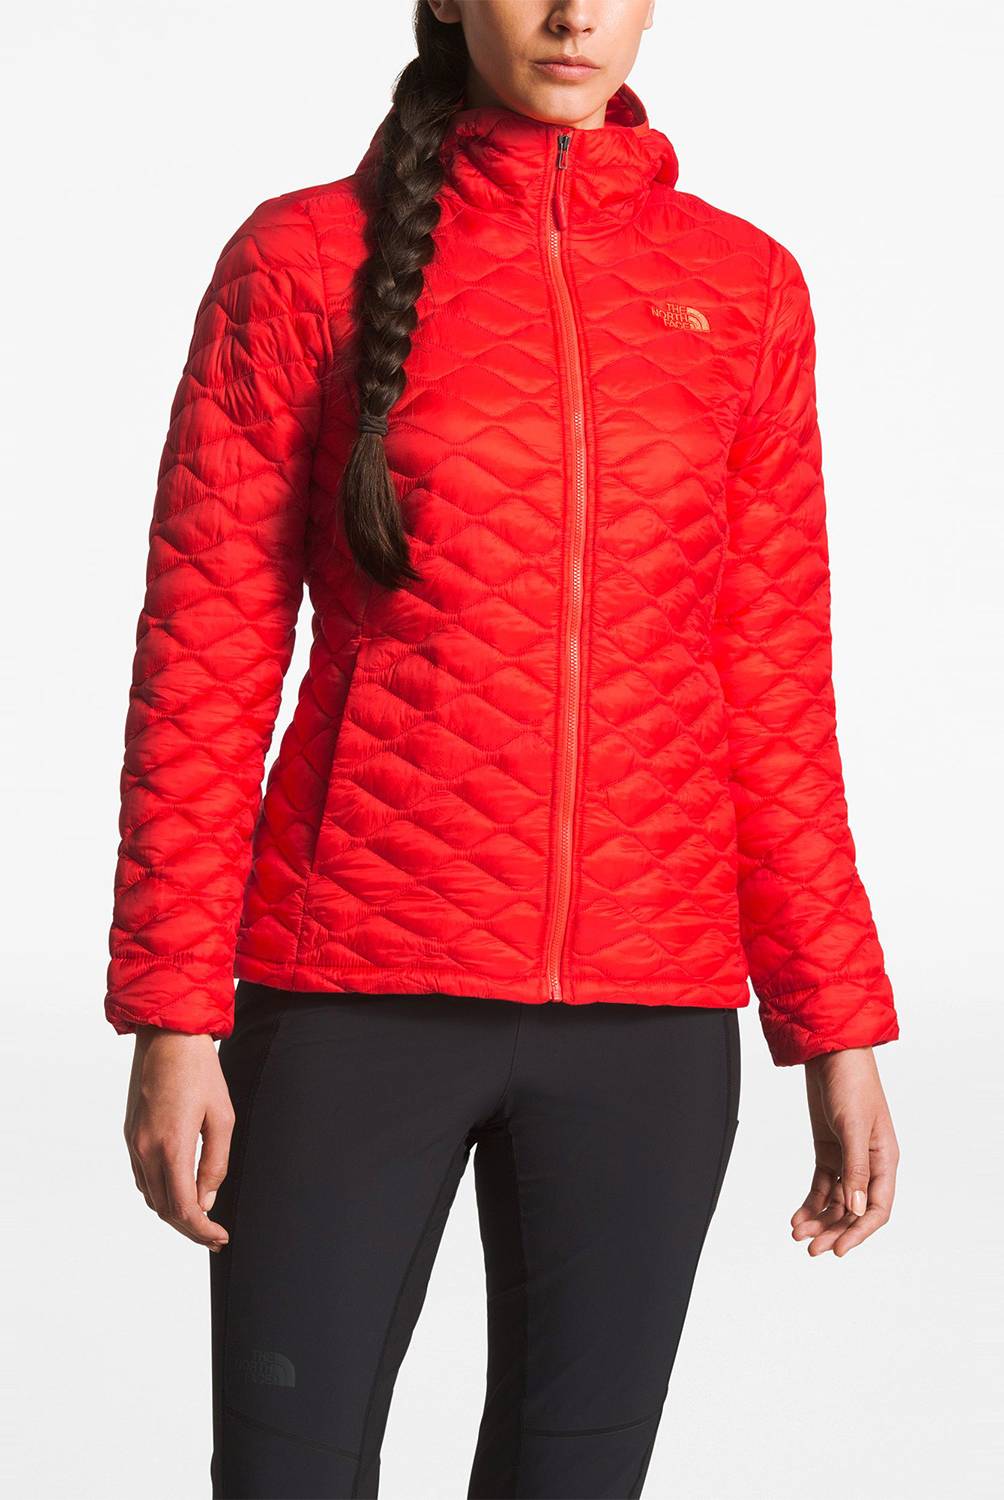 THE NORTH FACE - The North Face Parkas Outdoor Mujer